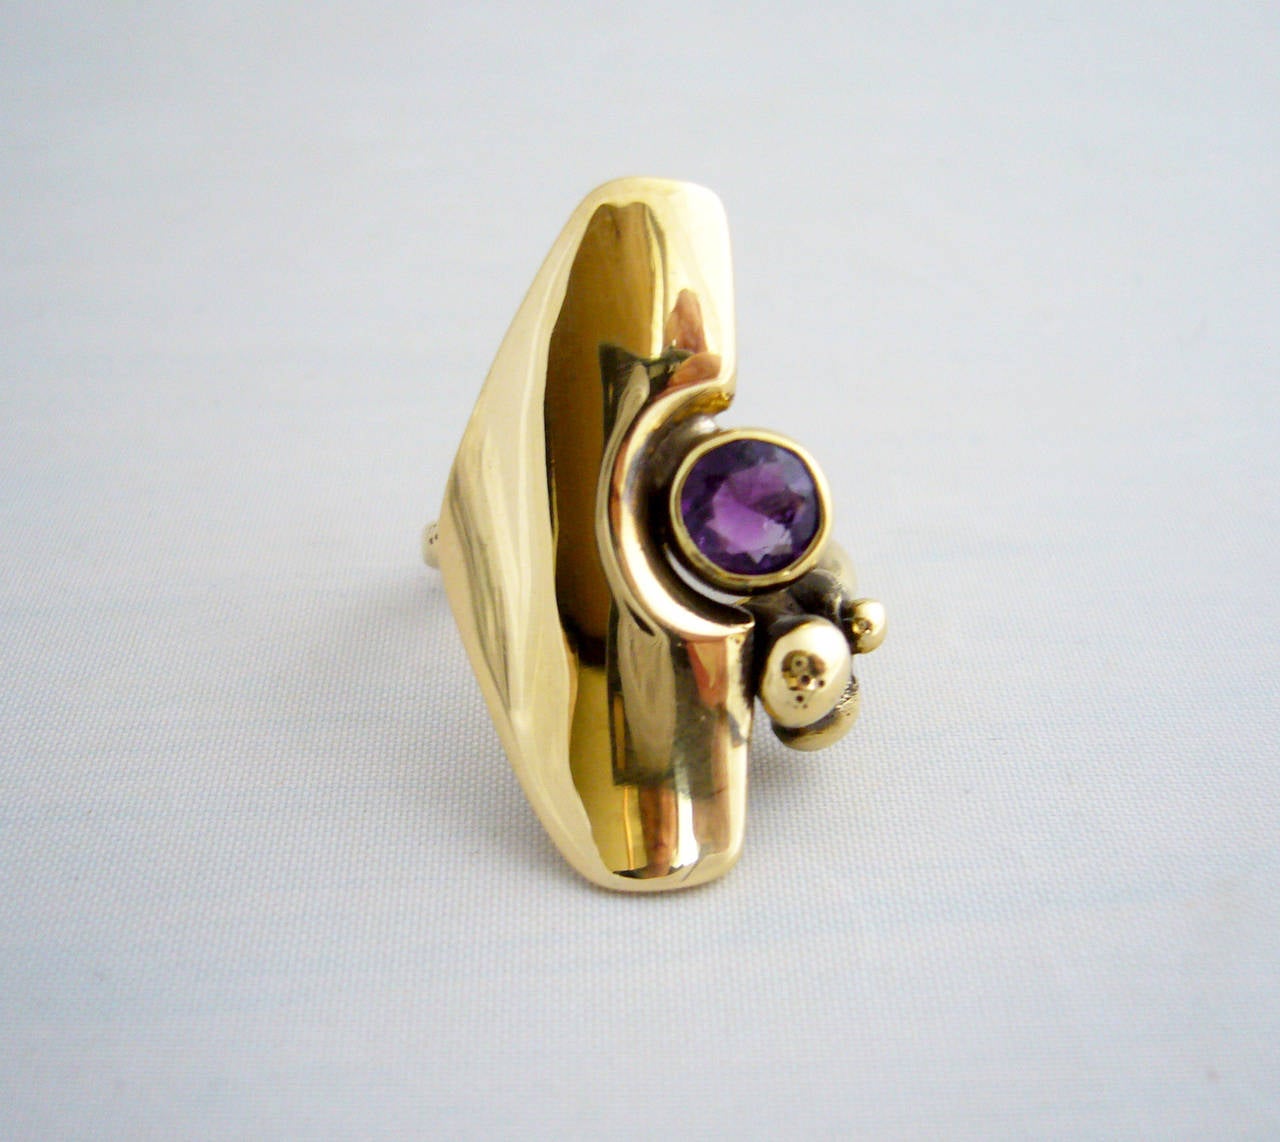 A bronze ring with faceted amethyst stone created by Jack Boyd of San Diego, circa 1970's.  Ring is a finger size 5.5 and is in excellent condition.  Signed with the artists conjoined JB cypher.